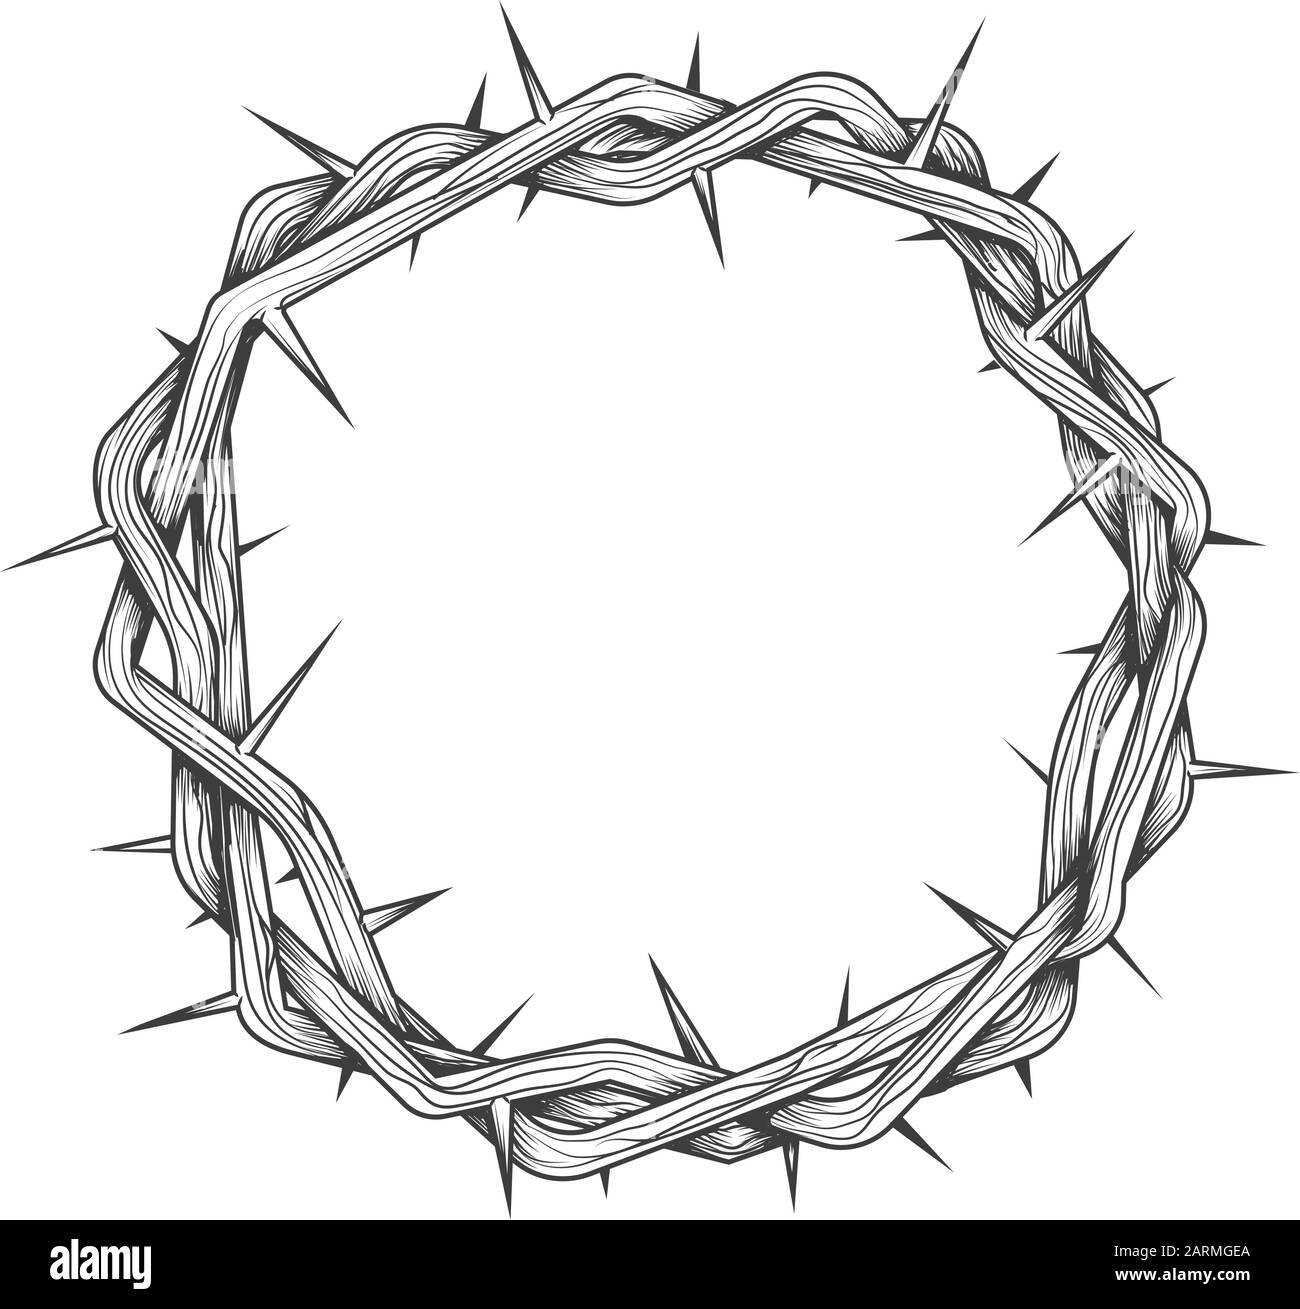 Crown of thorns tattoo. Easter religious symbol of Christianity hand drawn sketch in engraving style. Vector illustration Stock Vector